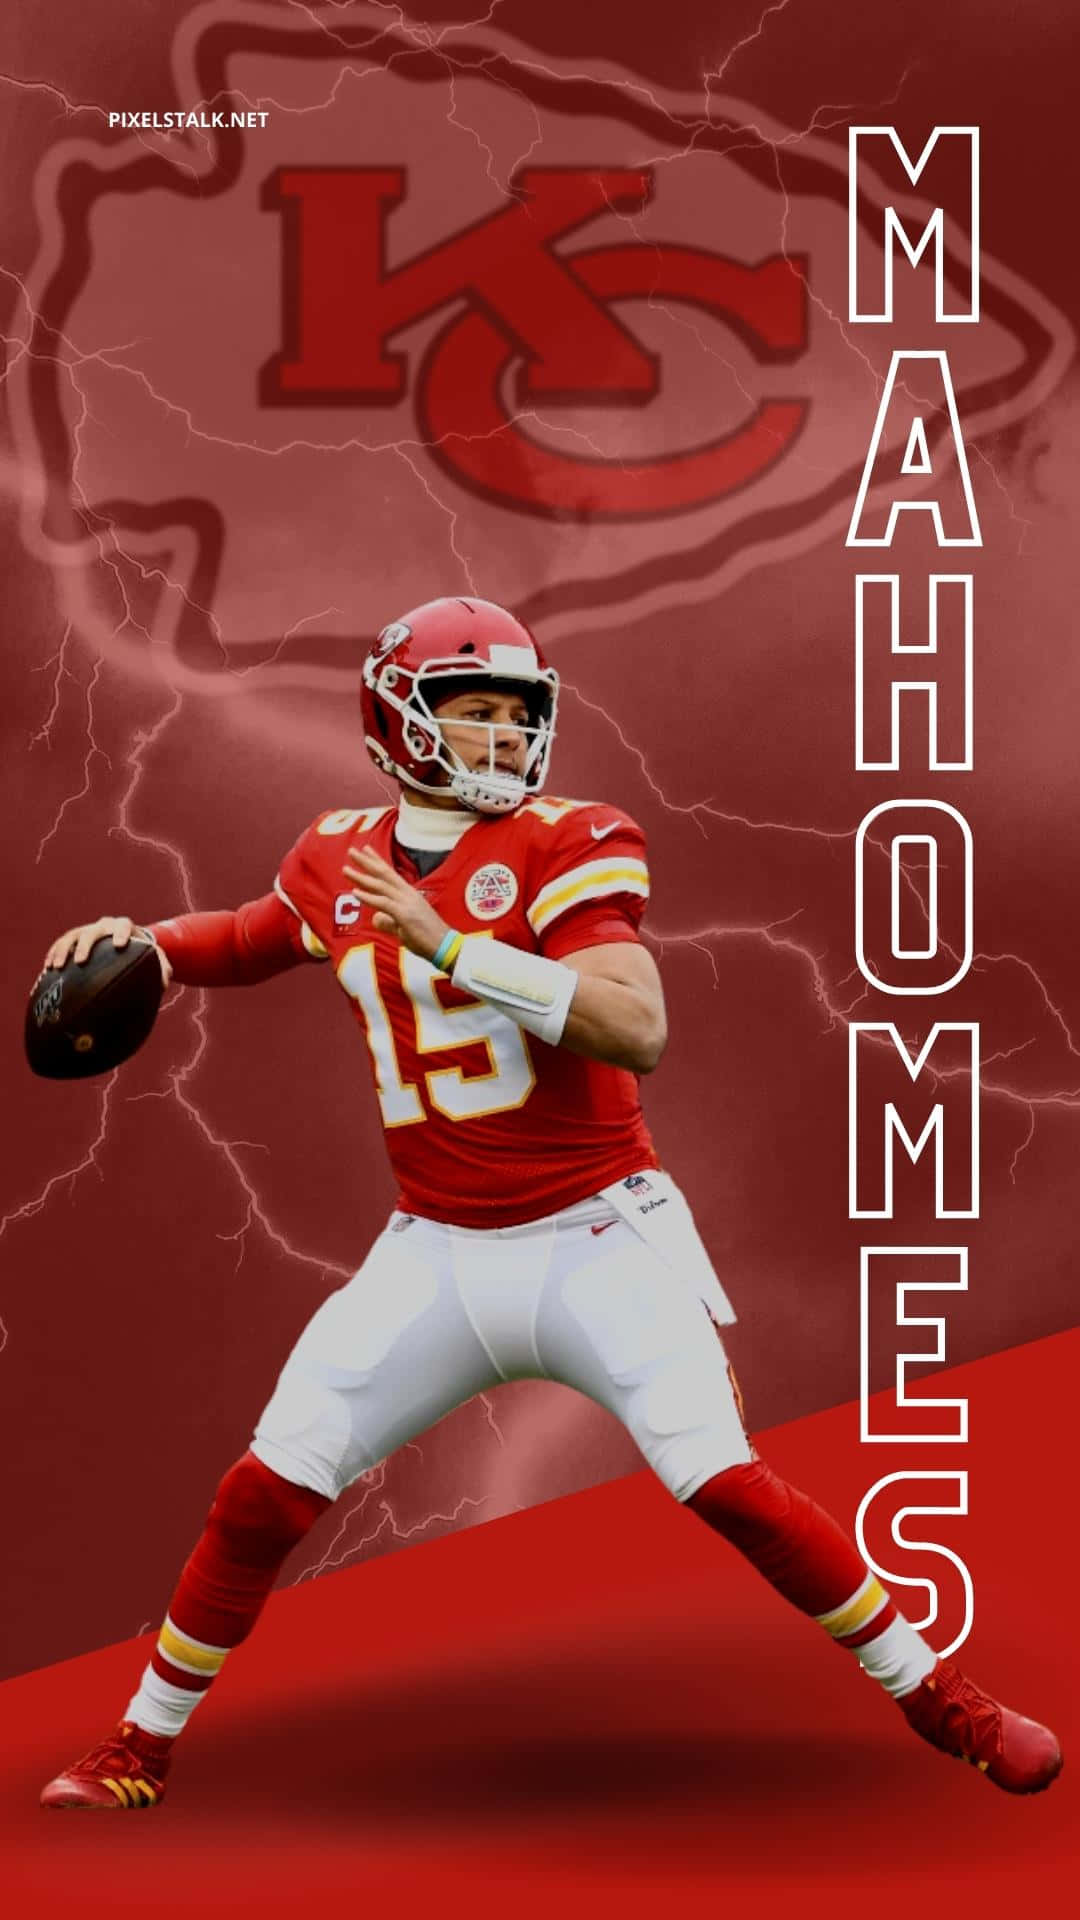 Patrick Mahomes wallpaper by Token4life  Download on ZEDGE  c230